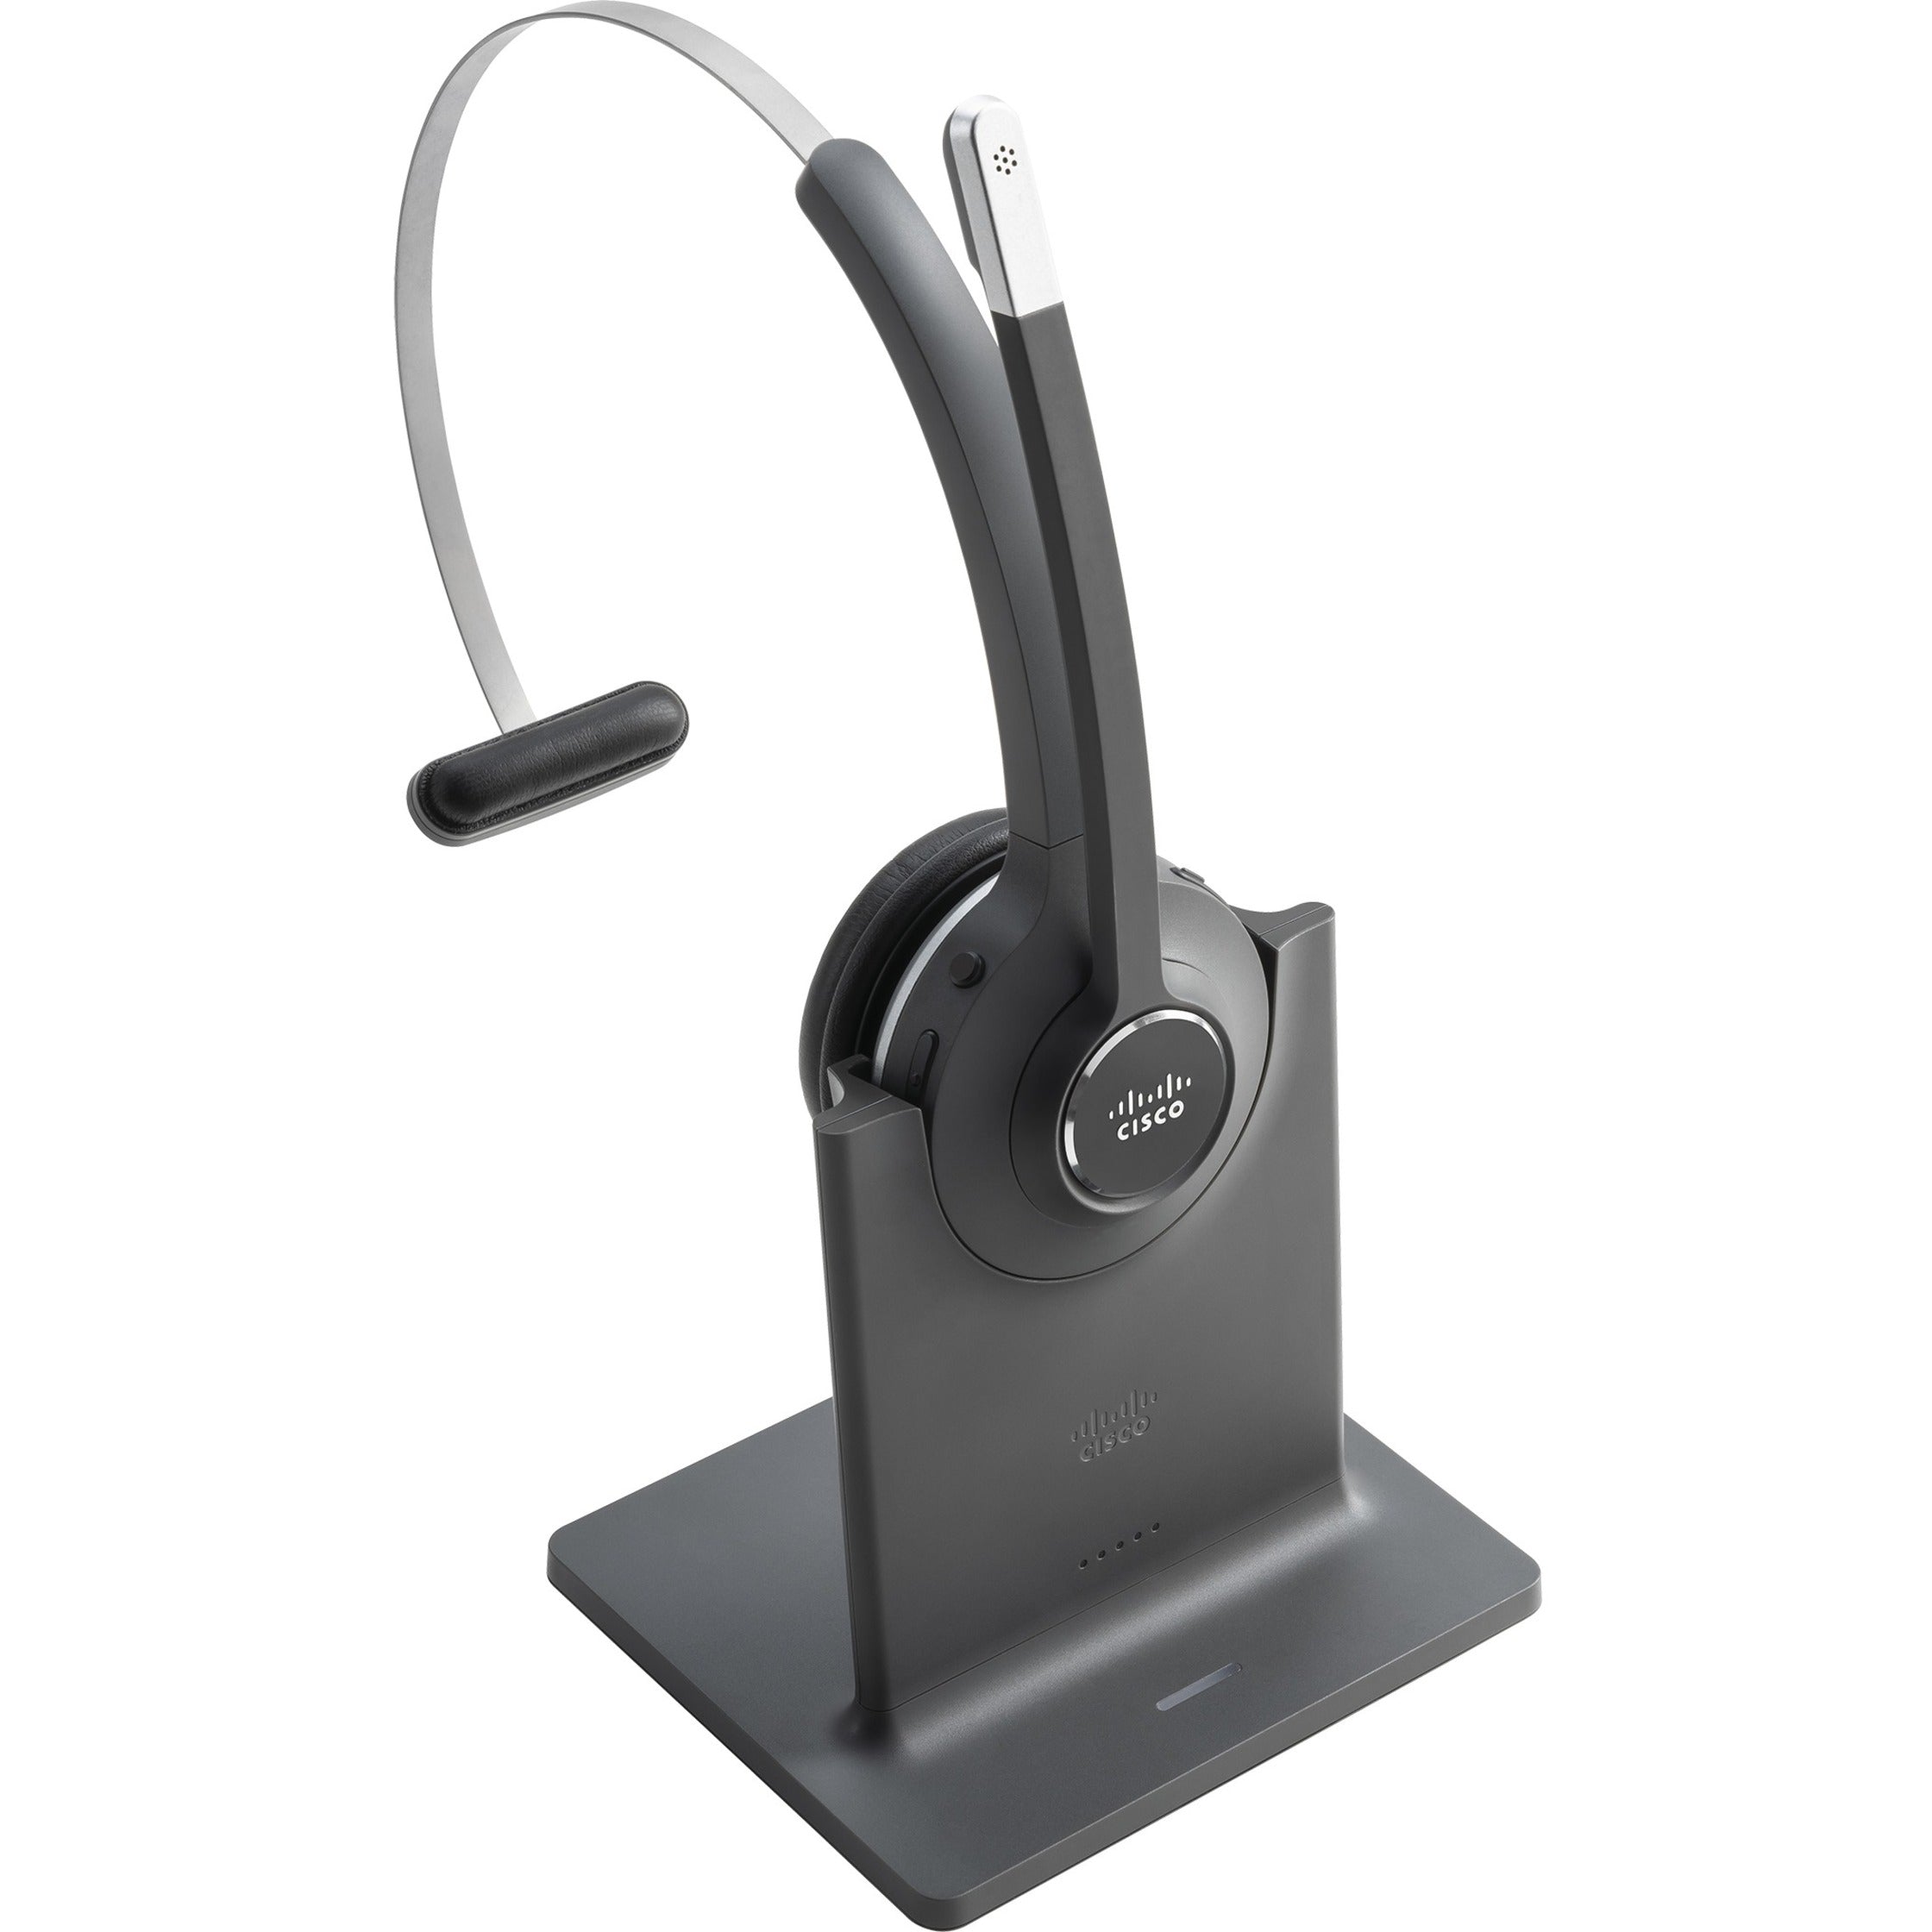 Cisco CP-HS-WL-561-S-US= 561 Headset, Wireless DECT 6.0 Mono Headset with Boom Microphone, 48 kHz Maximum Frequency Response, 300 ft Wireless Operating Distance